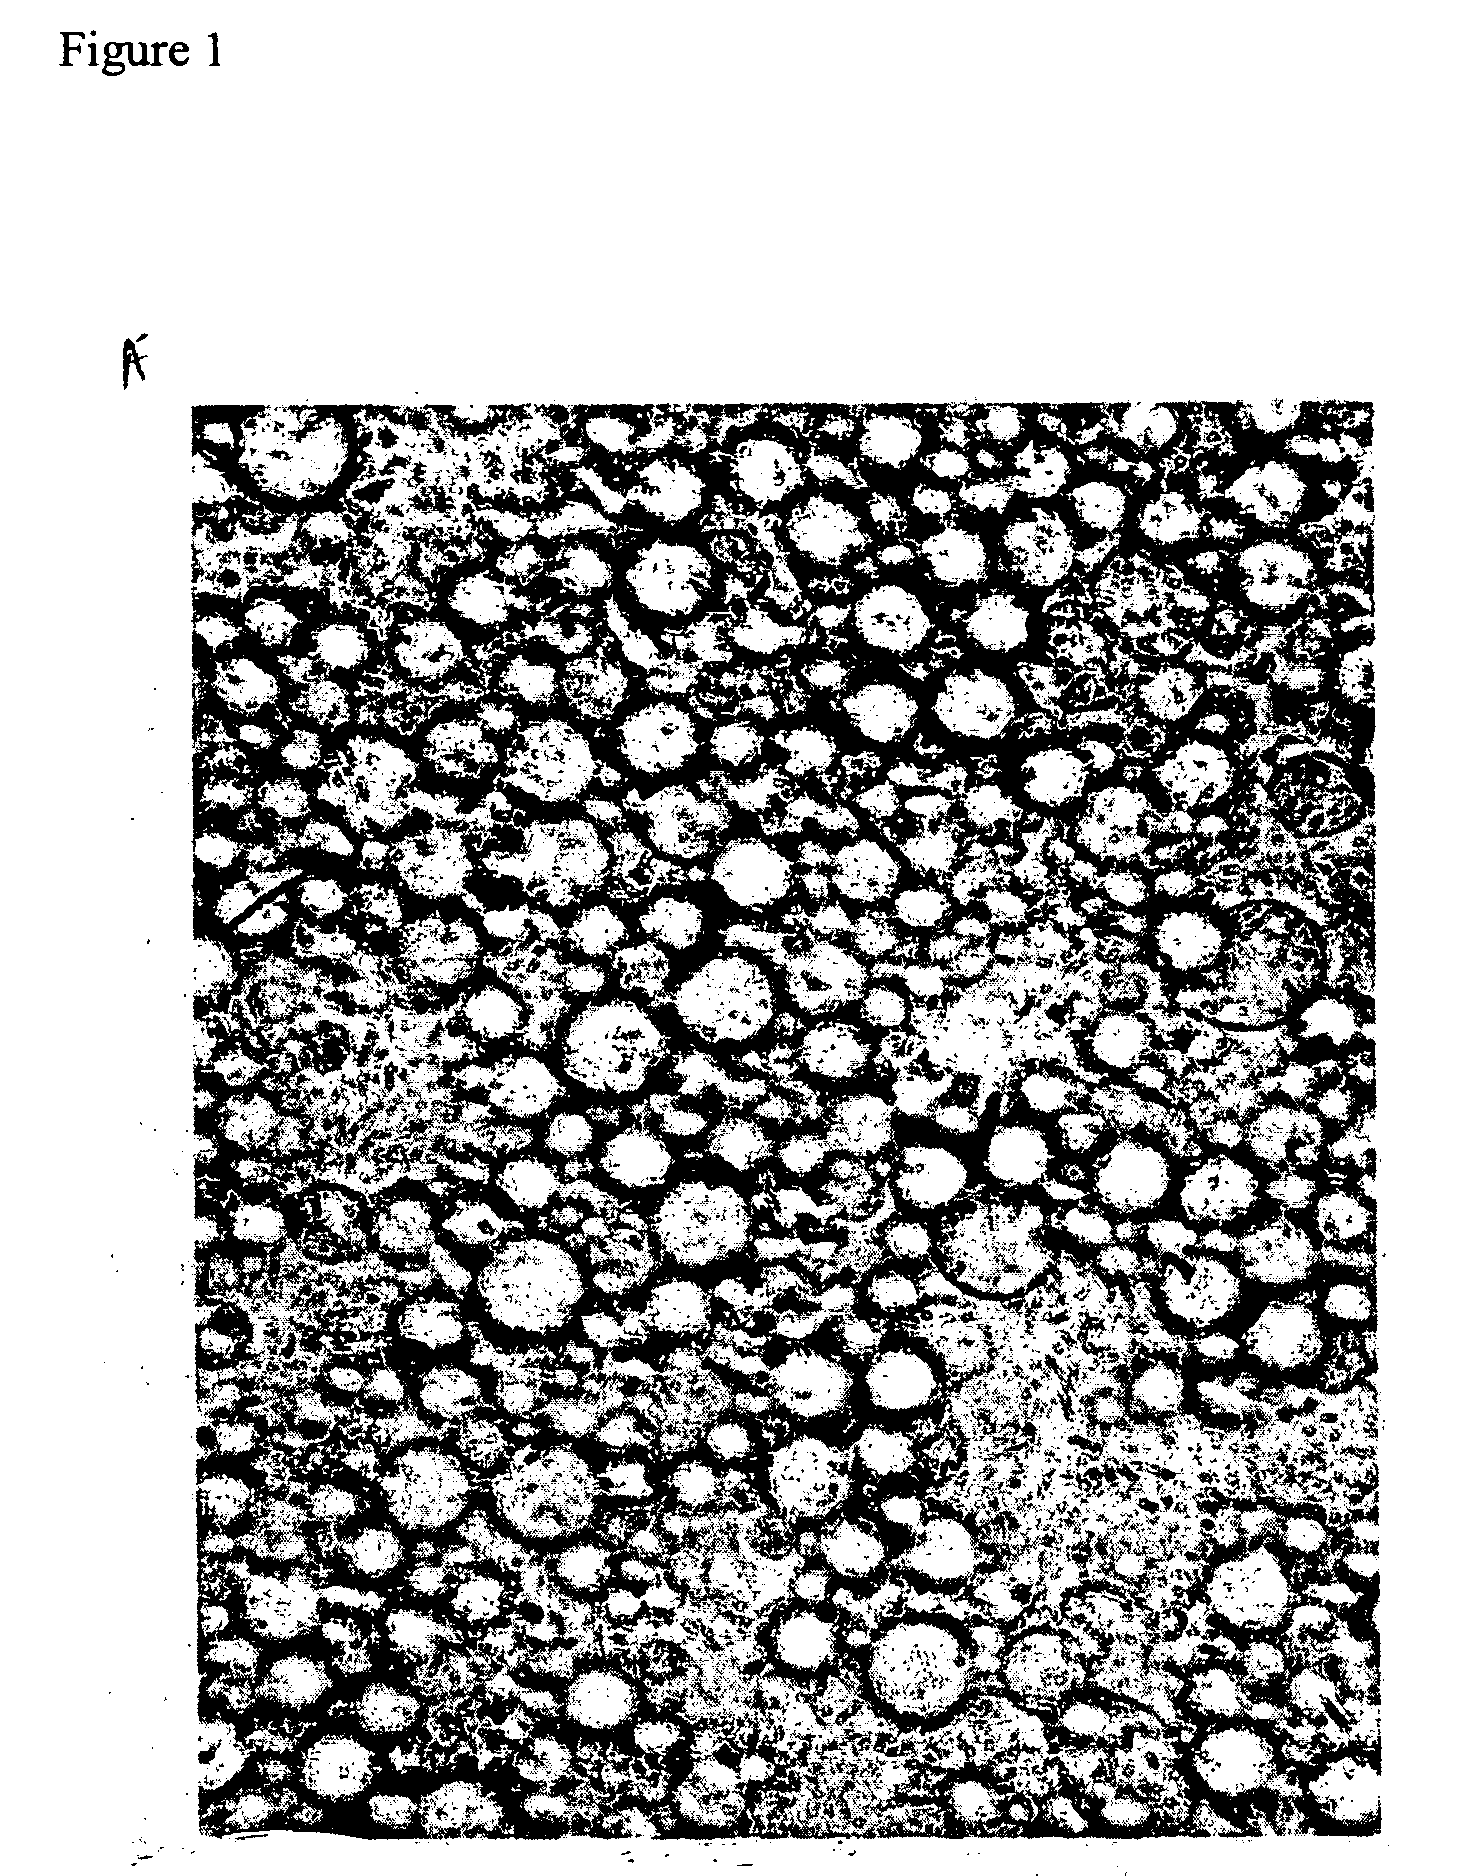 Process of producing microcapsules and product thereof